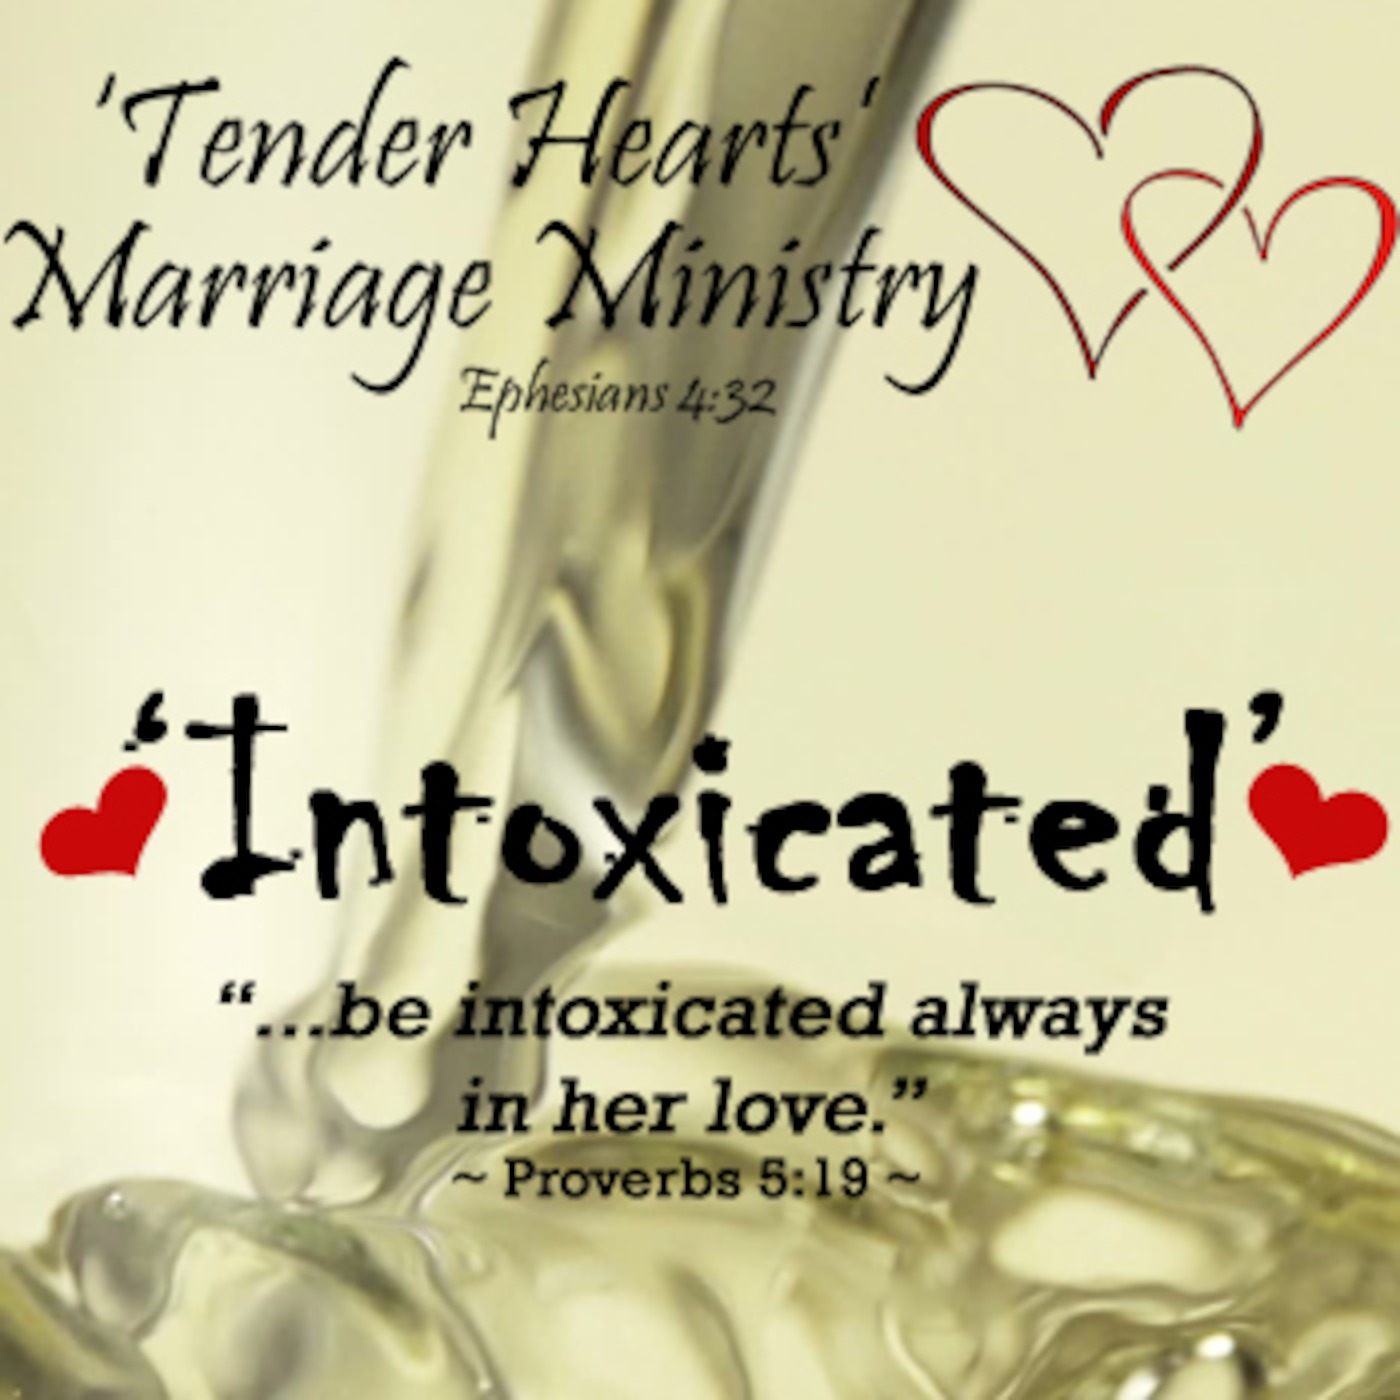 Tender Hearts Marriage Builders: ’Intoxicated’